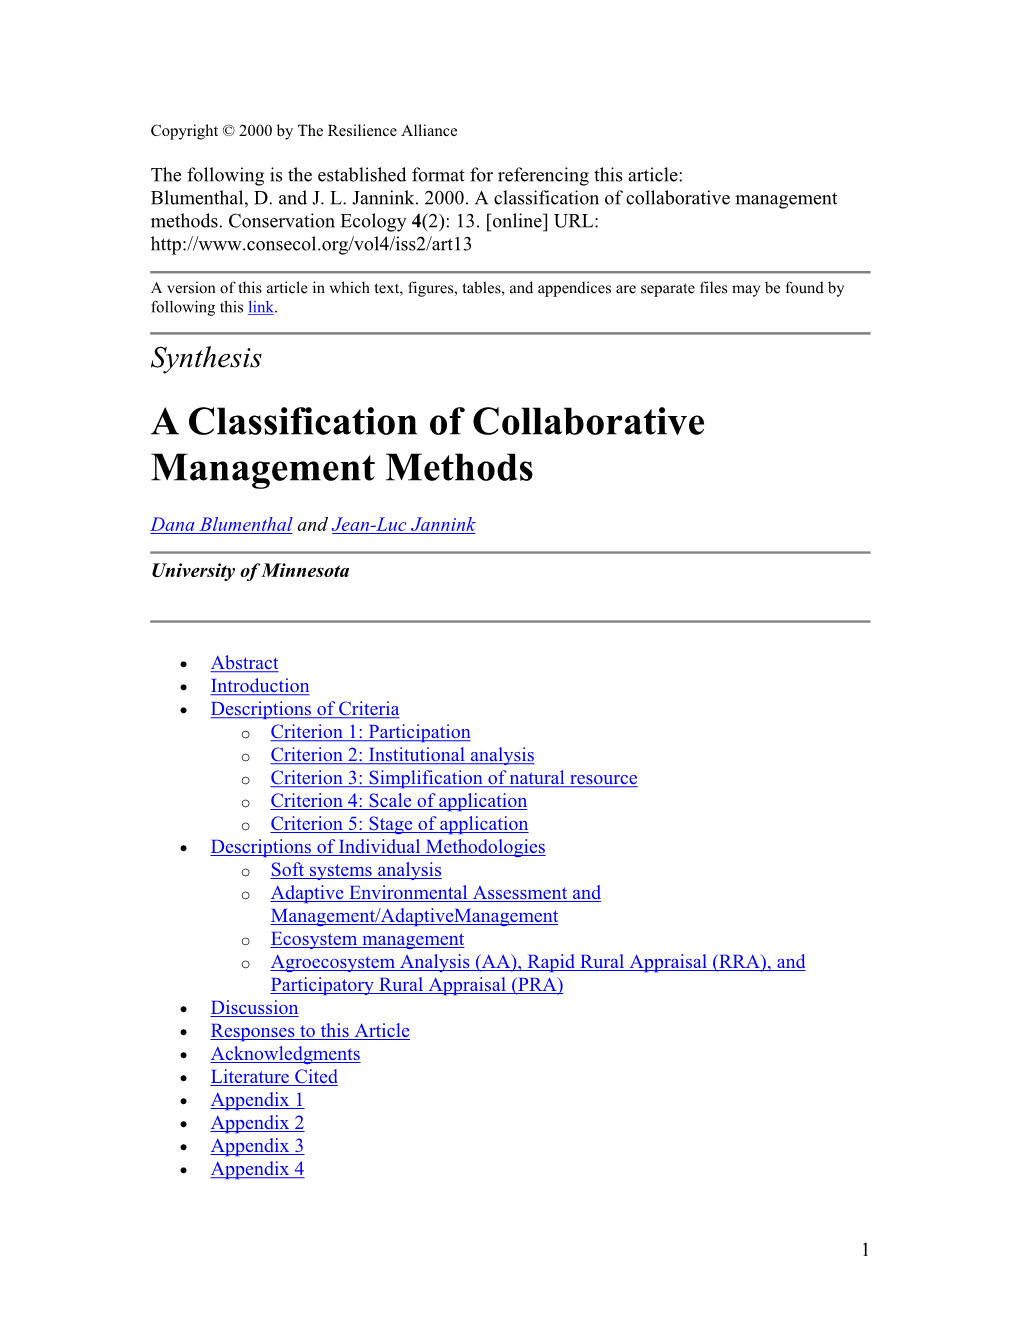 A Classification of Collaborative Management Methods